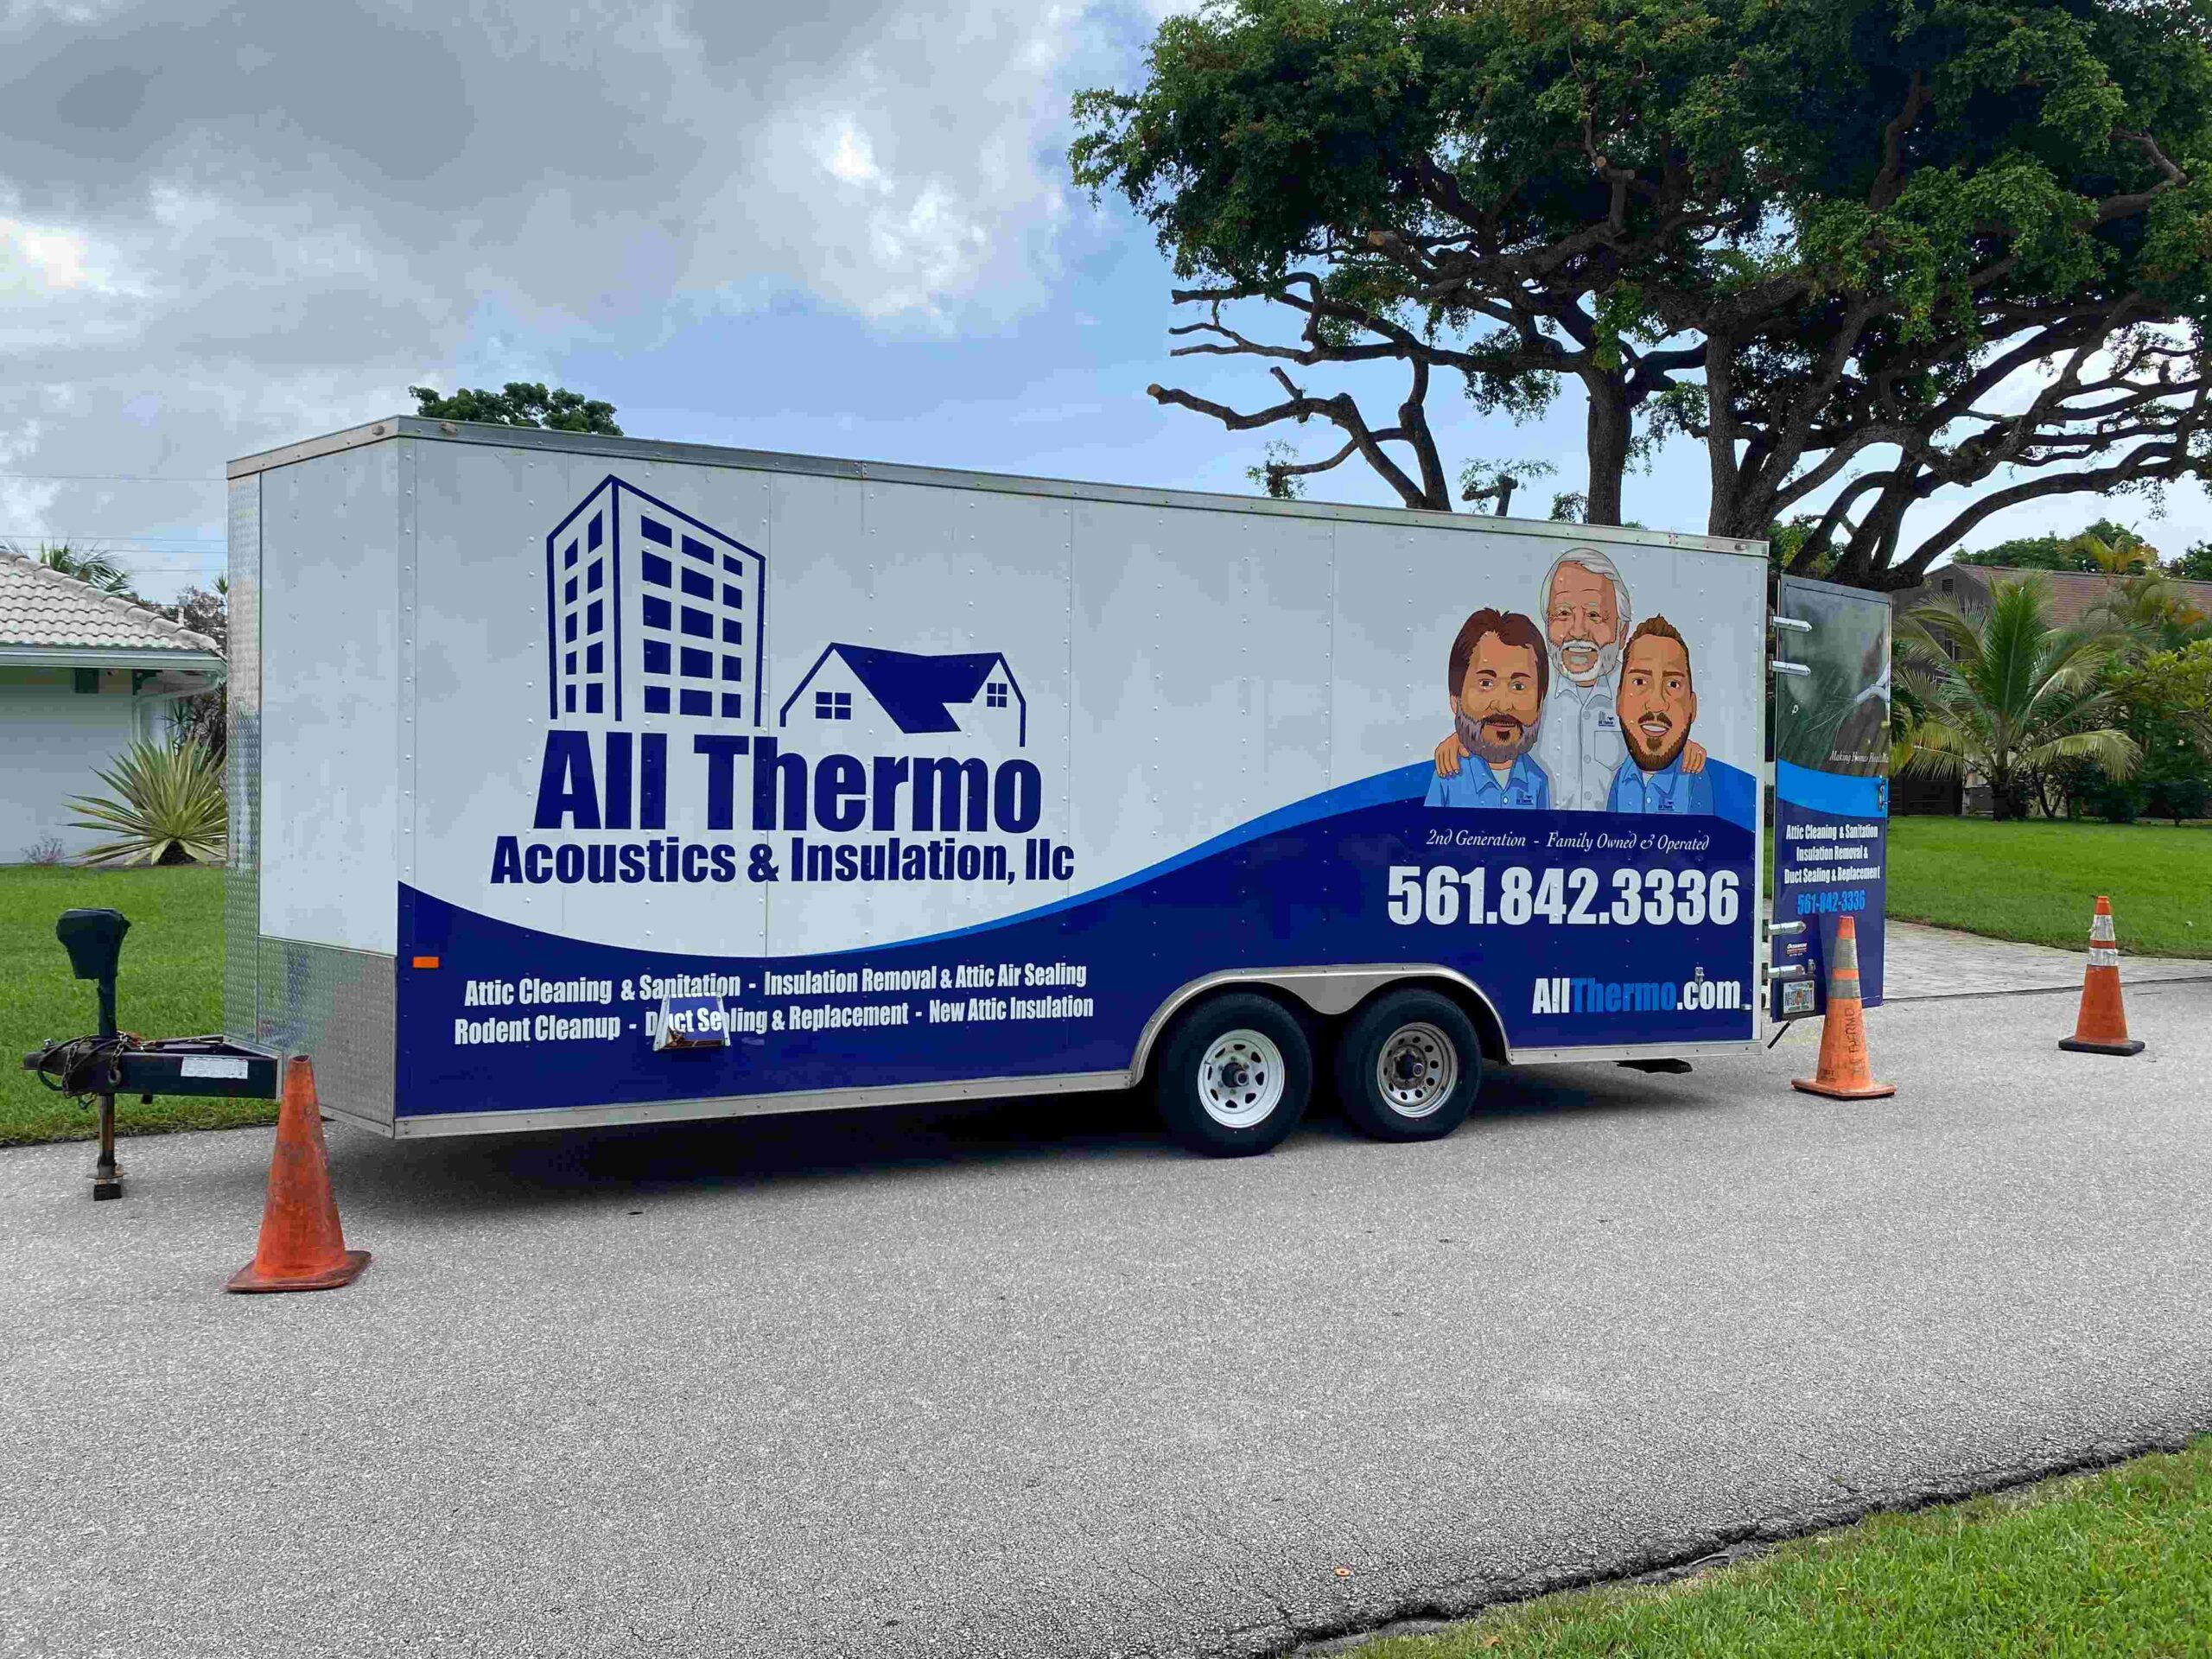 All Thermo - AC Duct Work, HVAC & Air Ductwork Services